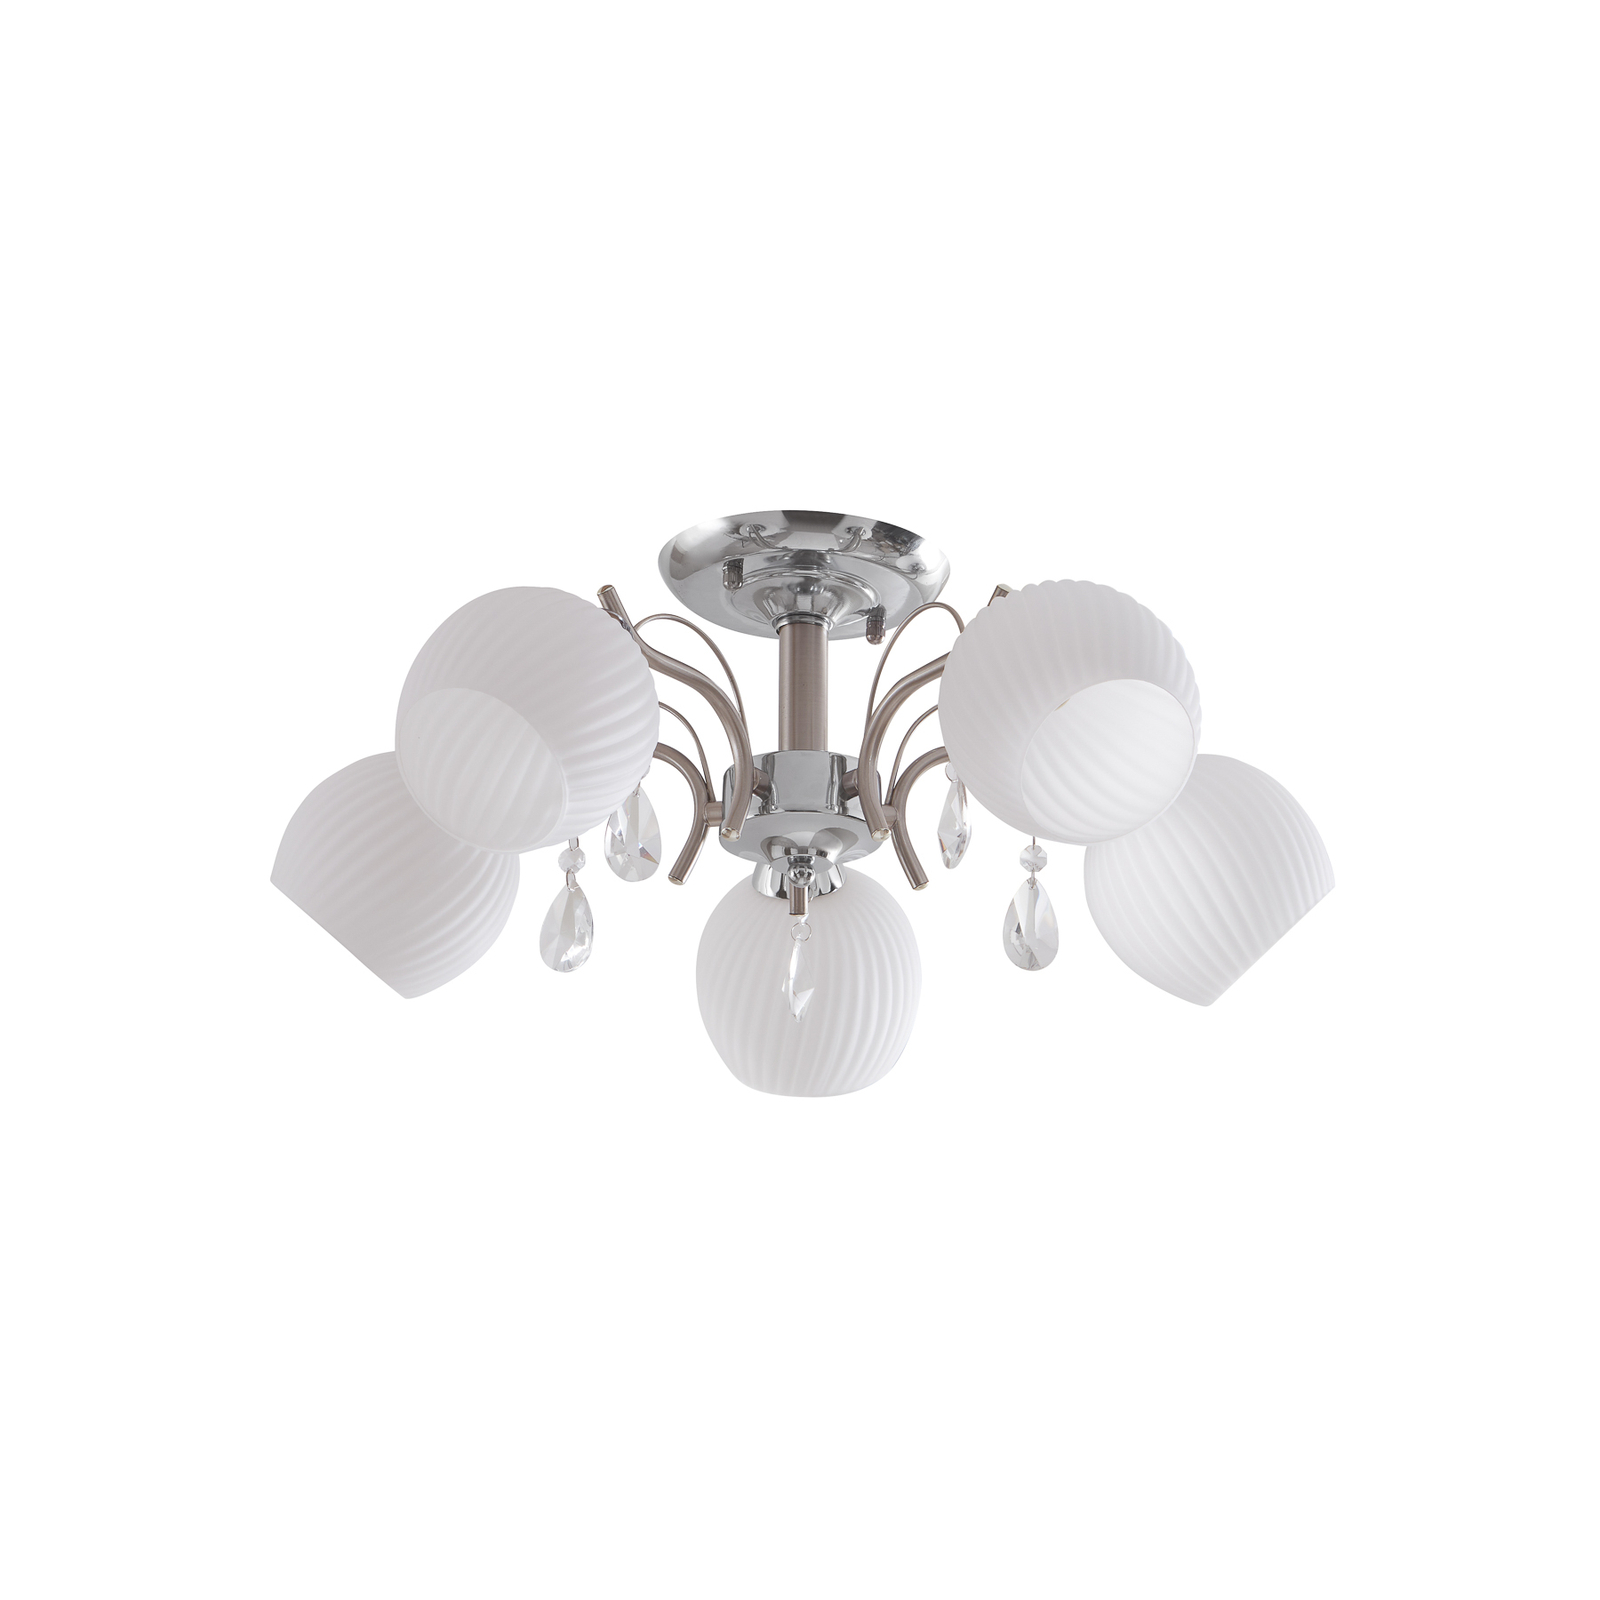 Lindby Feodora ceiling light with glass, 5-bulb